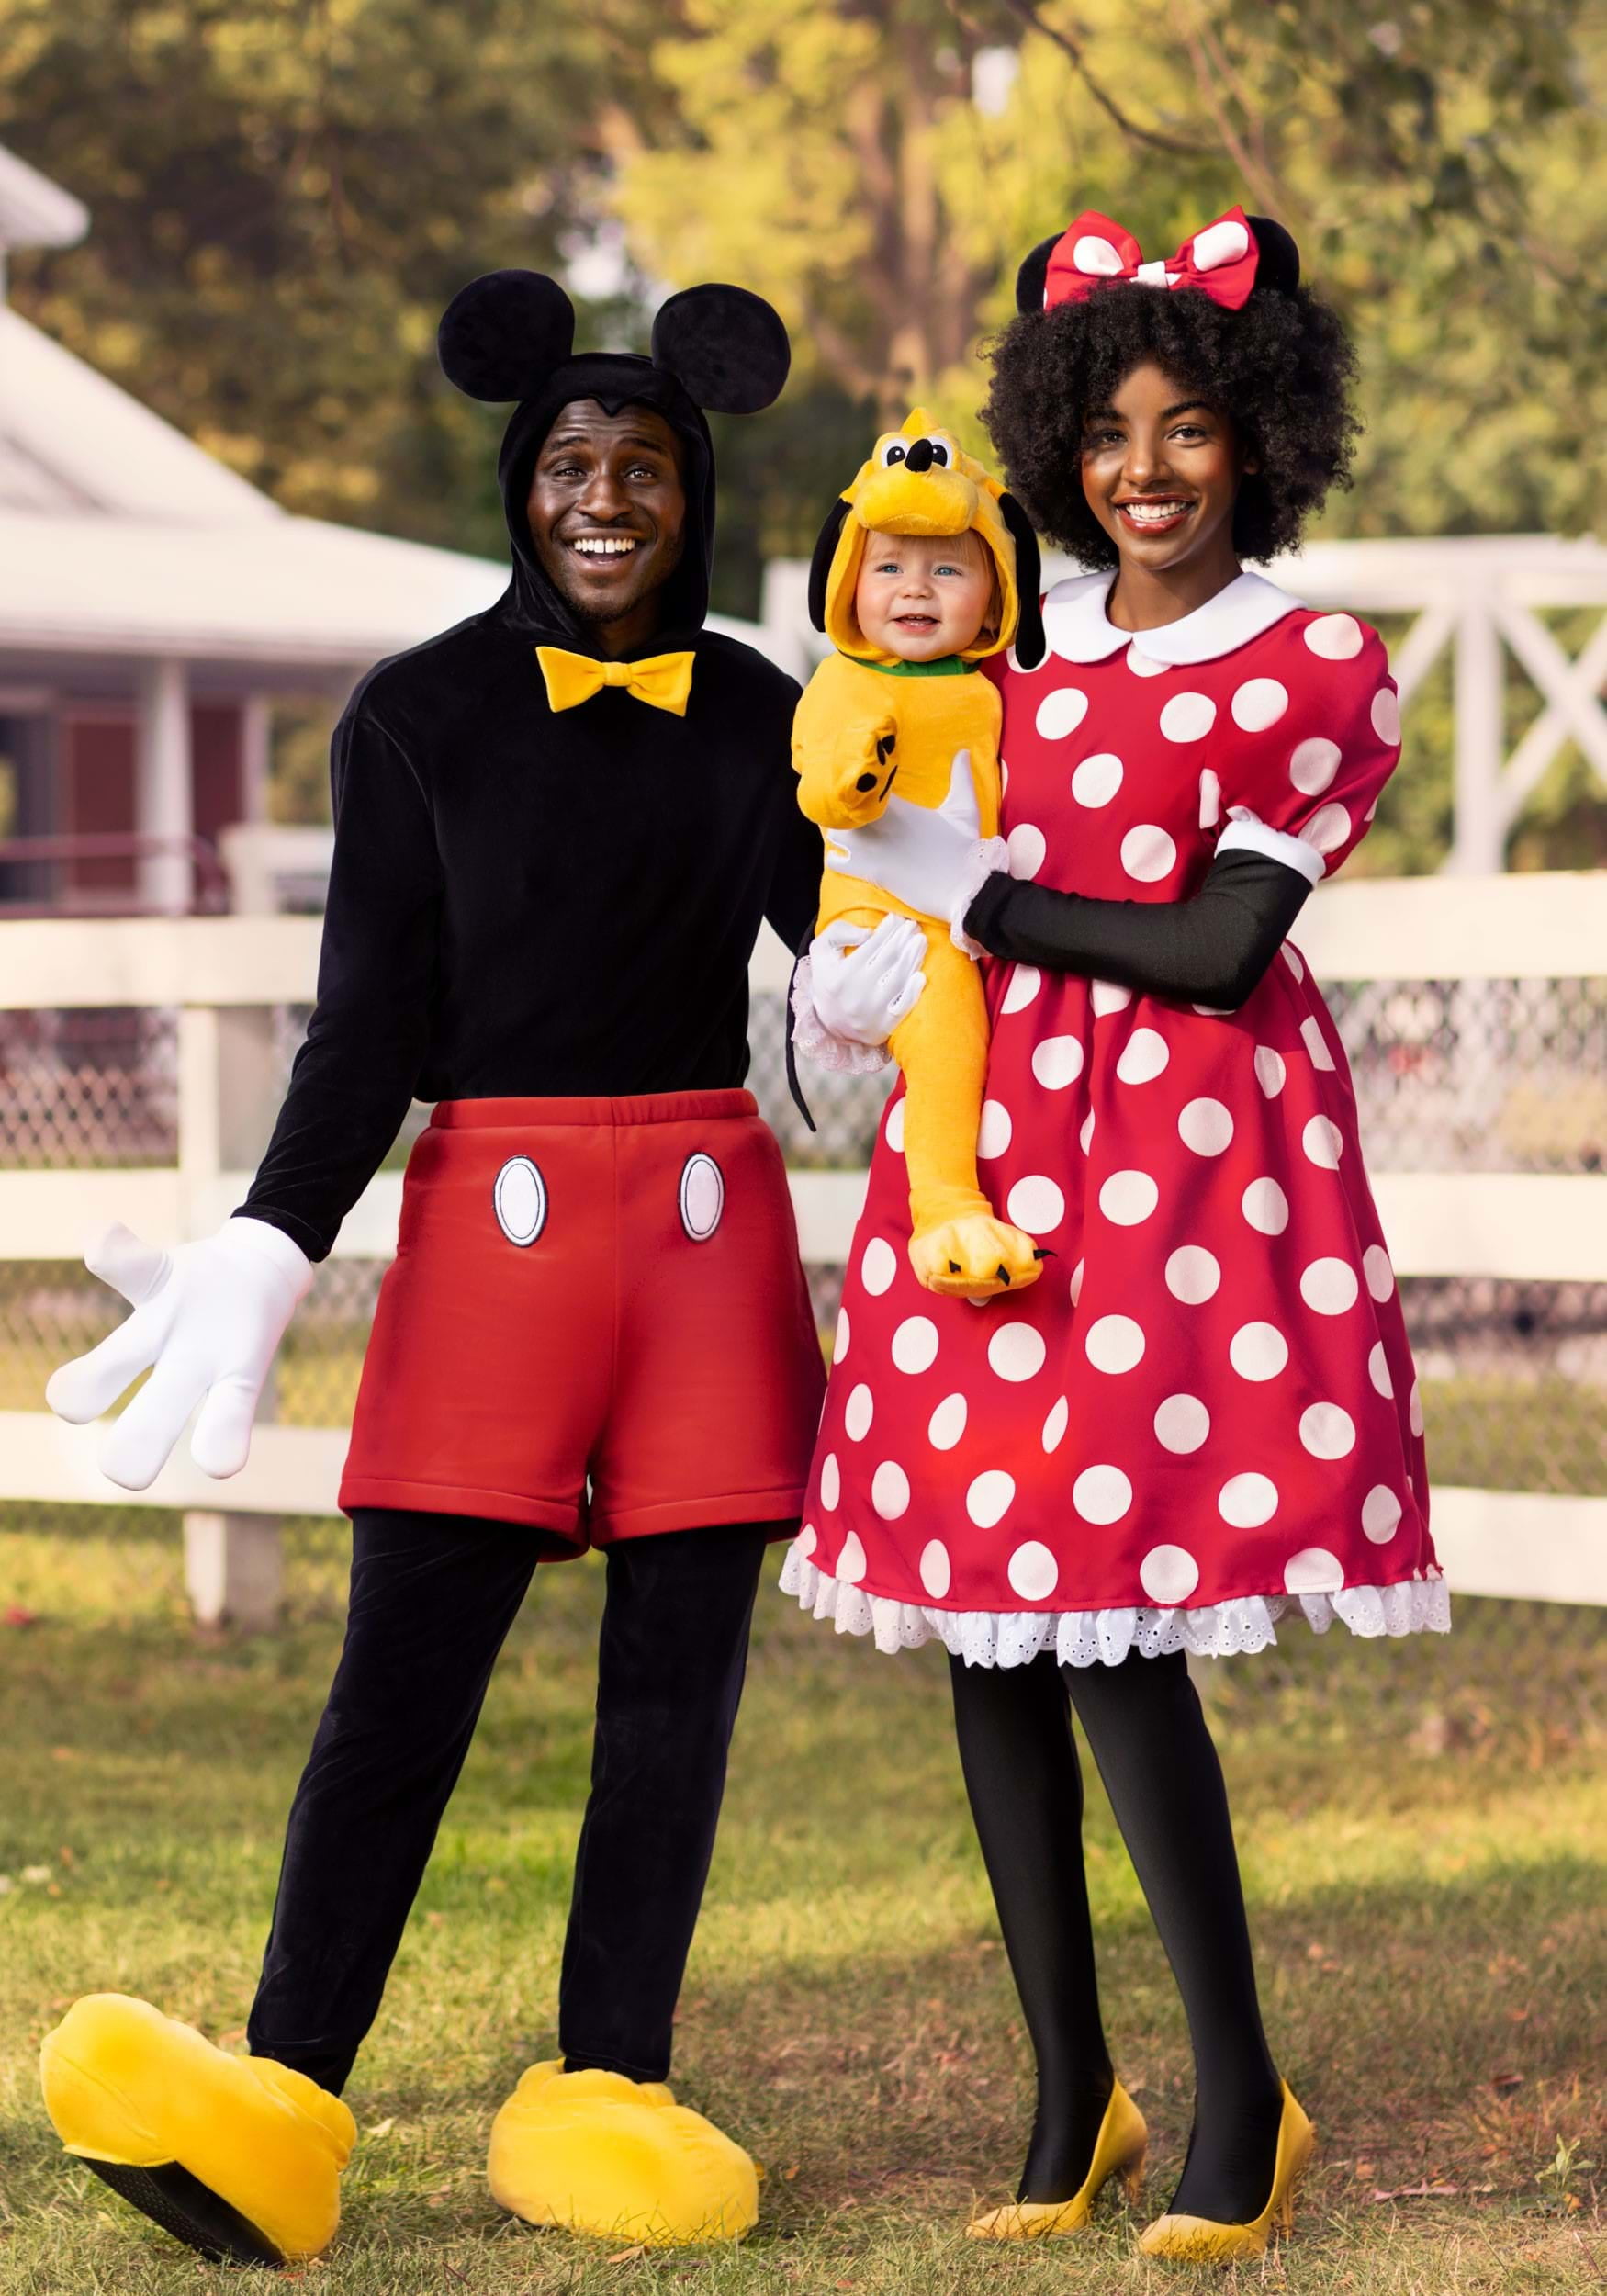 Your Pal, Mickey Mouse Costume | How-to Guide